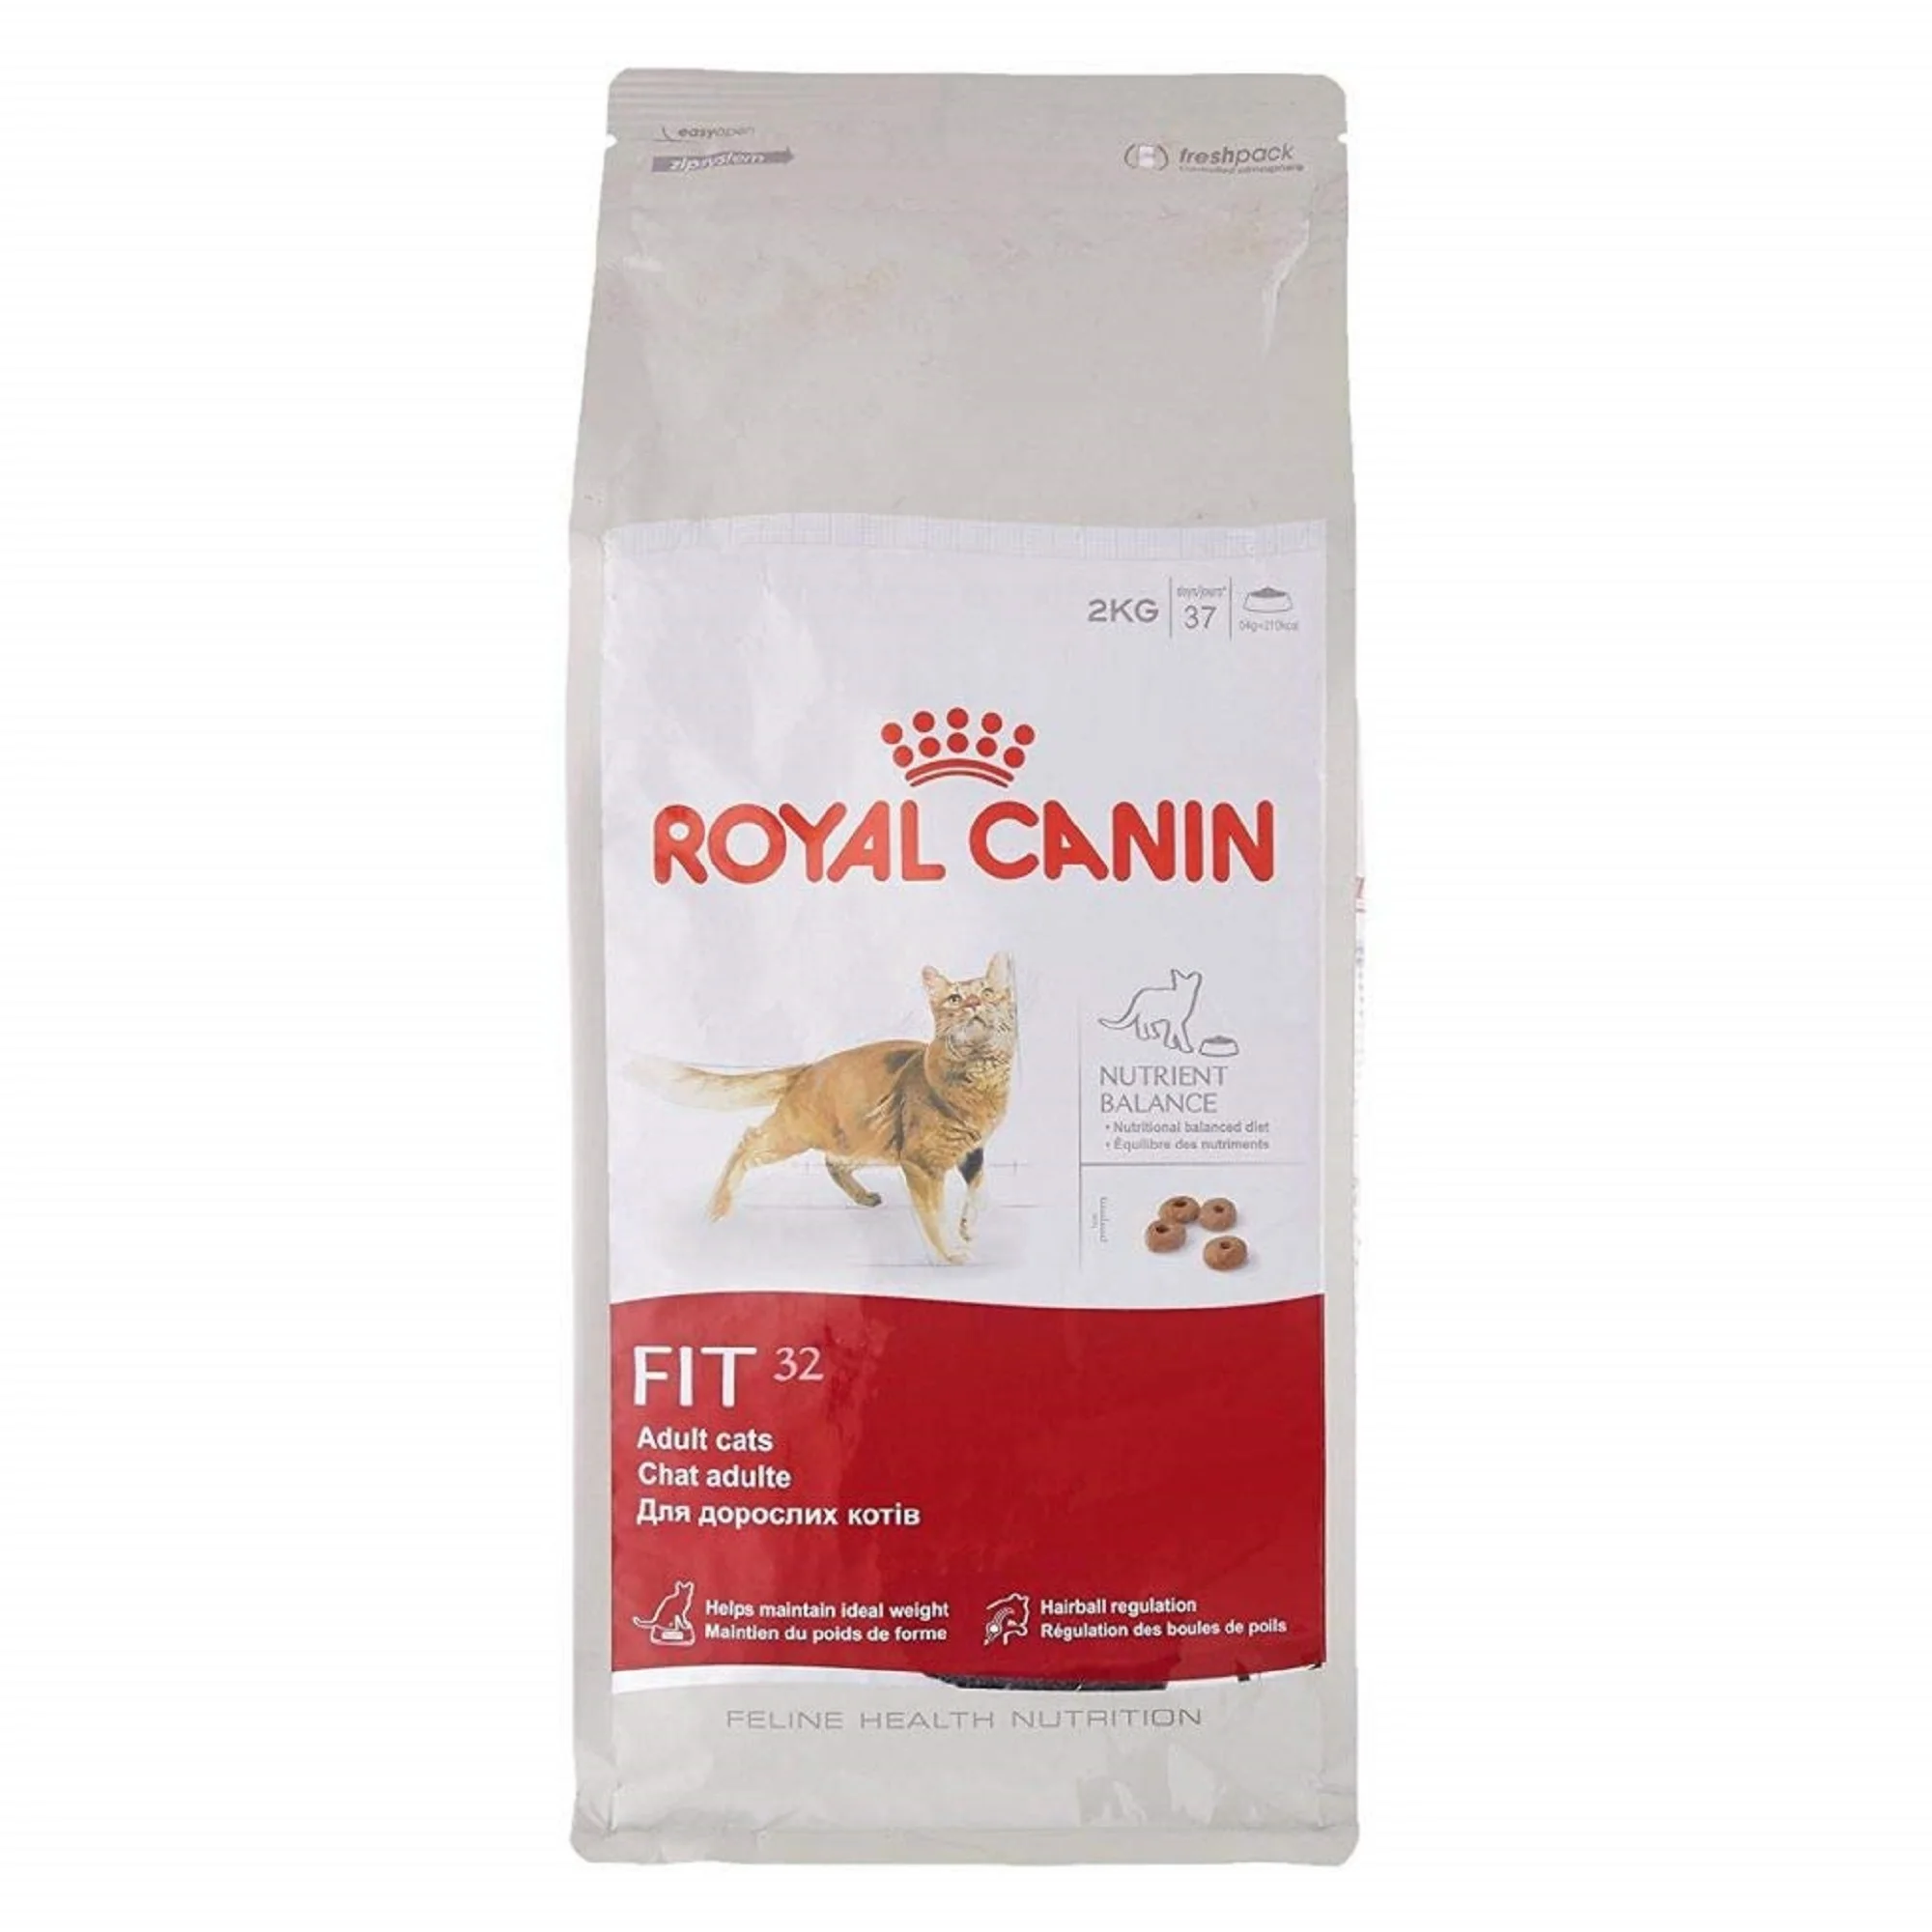 Royal Canin Fit 32 Adult Dry Cat Food Whatsapp Buy Bulk Dry Cat Food Dry Cat Food Halal Cat Food Product On Alibaba Com